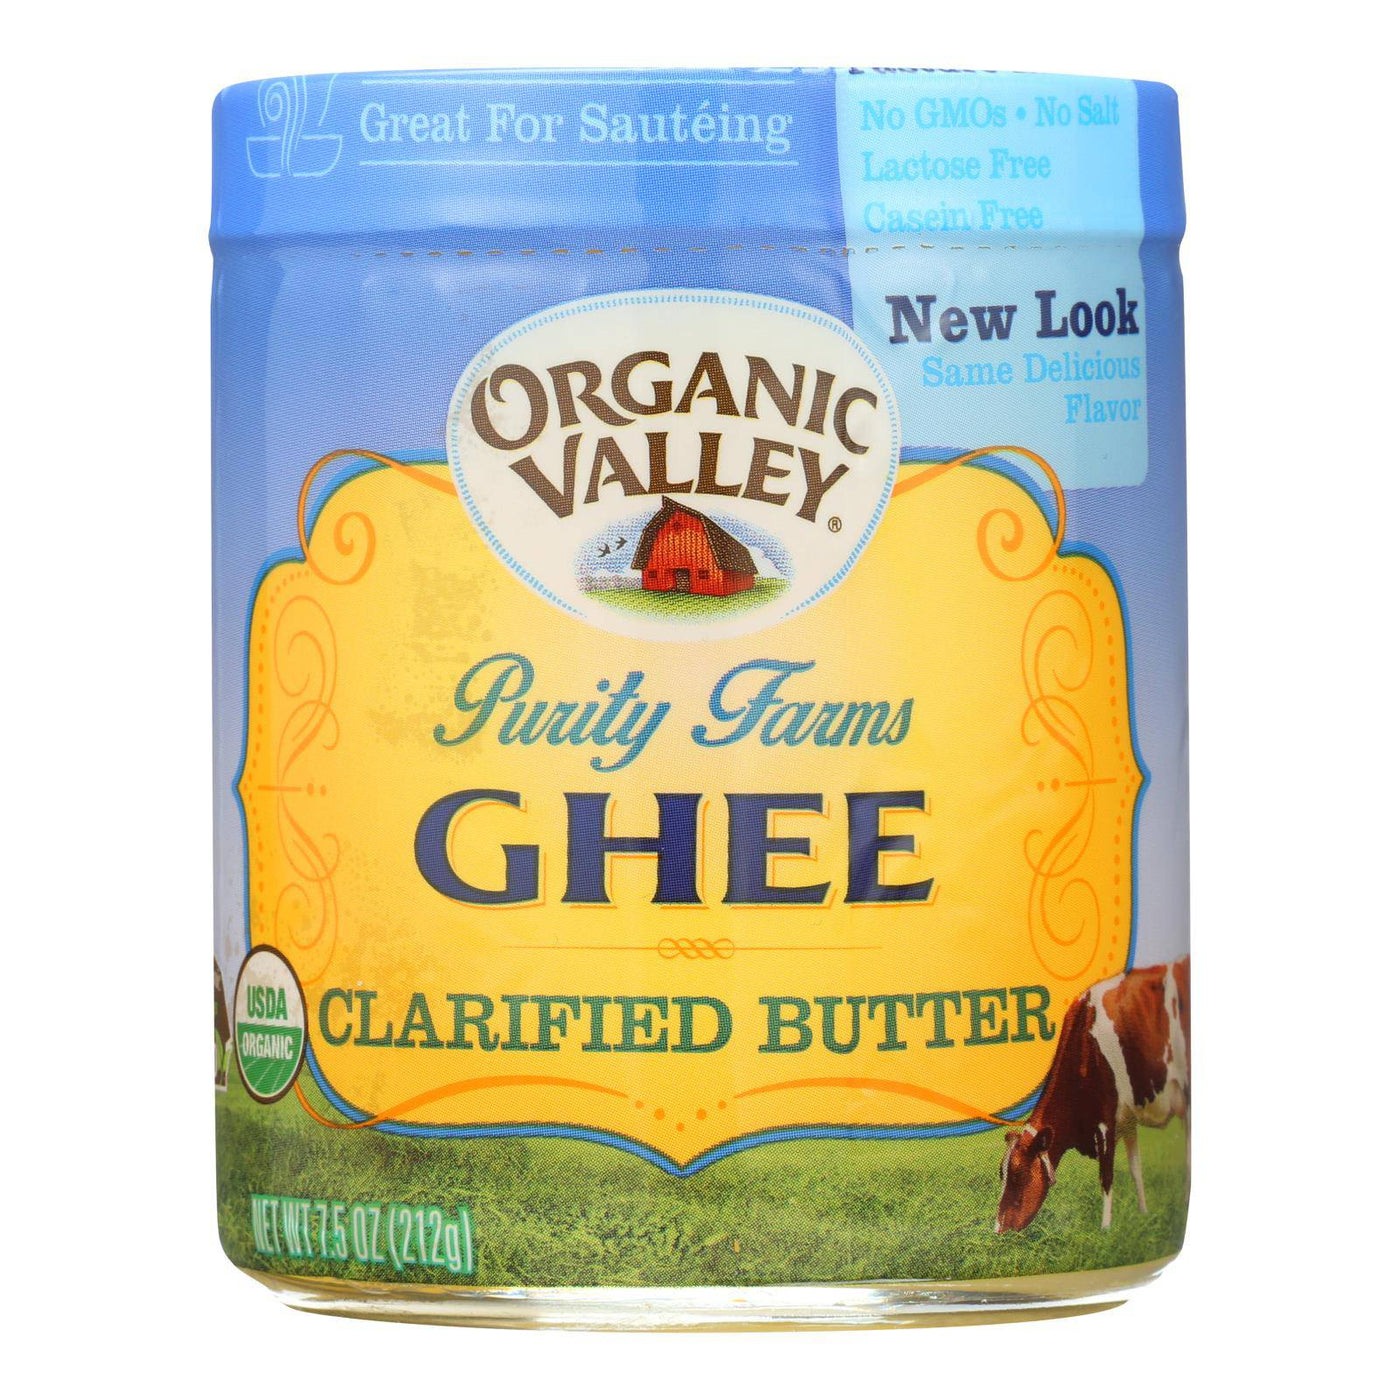 Purity Farms Ghee - Clarified Butter - Case Of 12 - 7.5 Oz. | OnlyNaturals.us